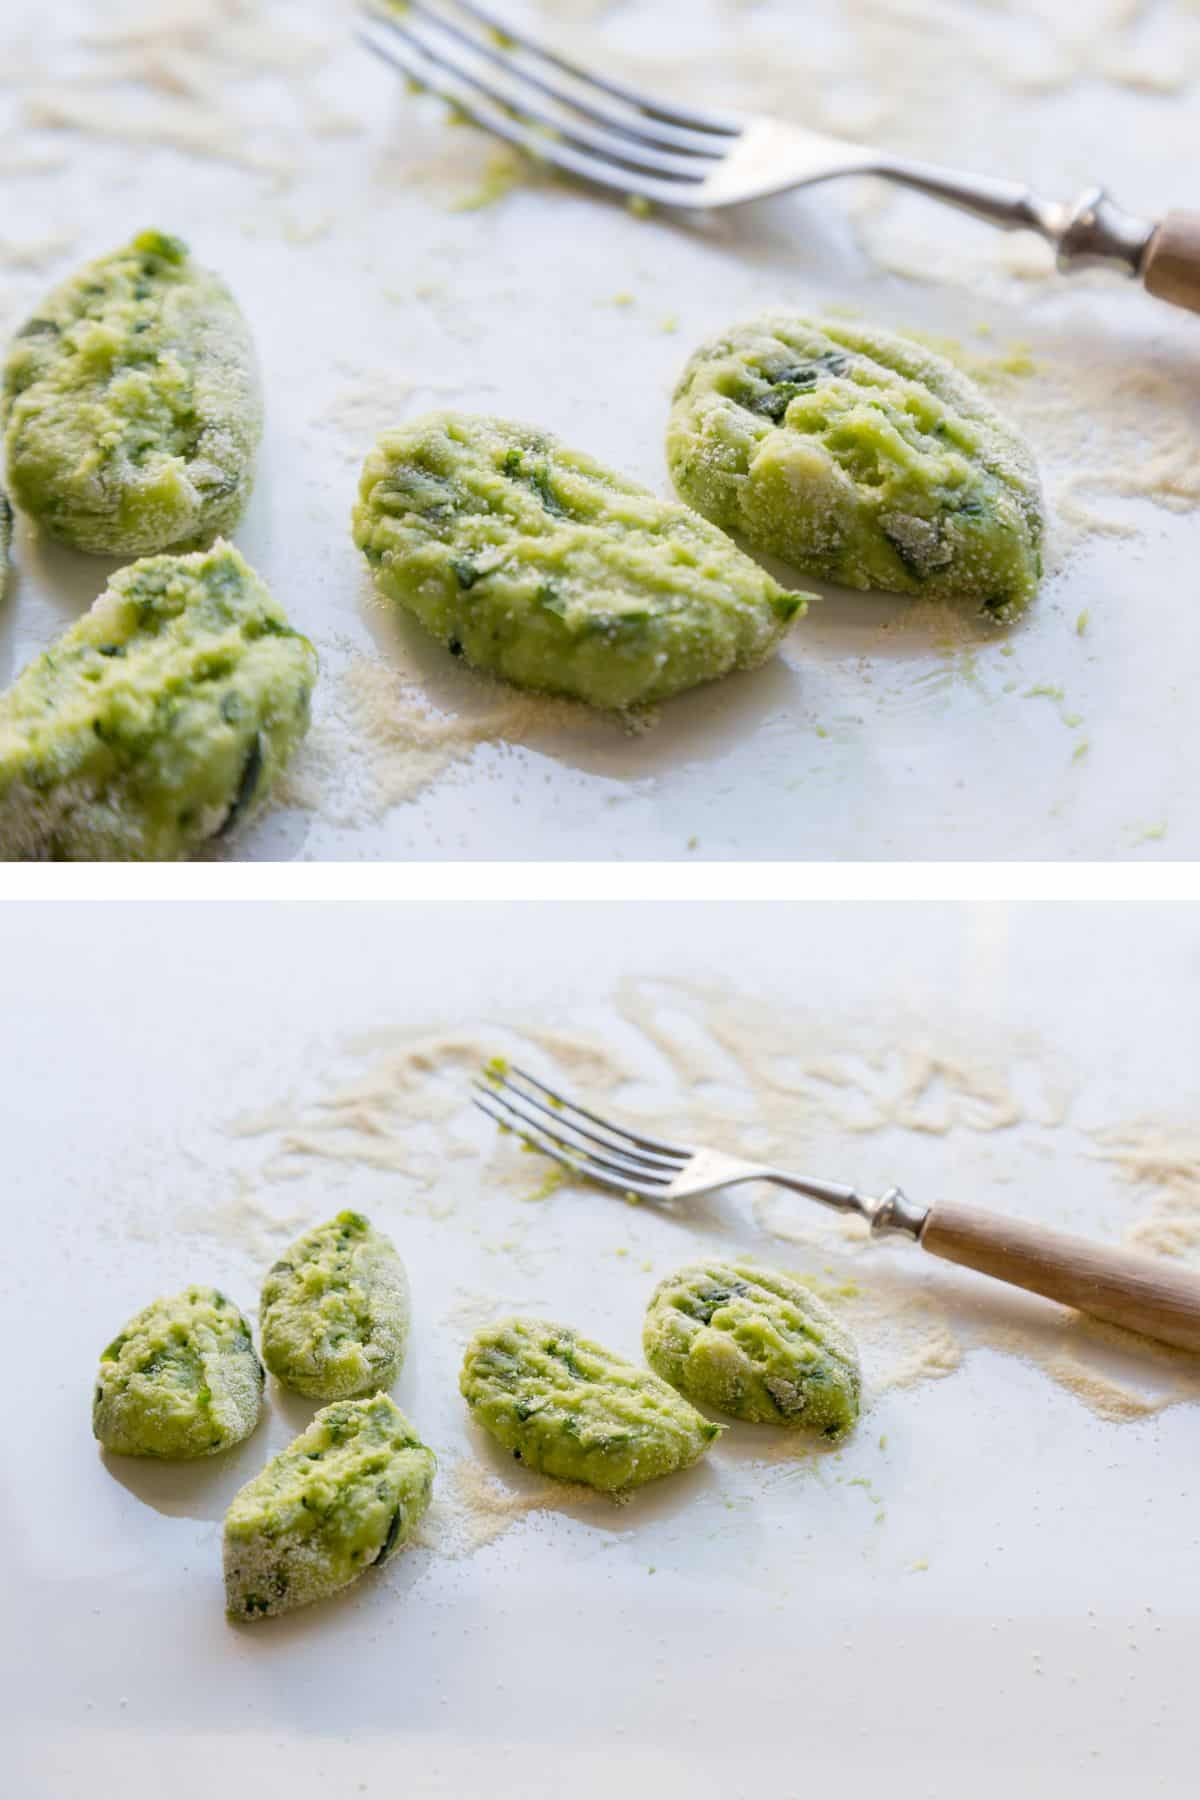 wild garlic gnocchi being shaped on a marble countertop